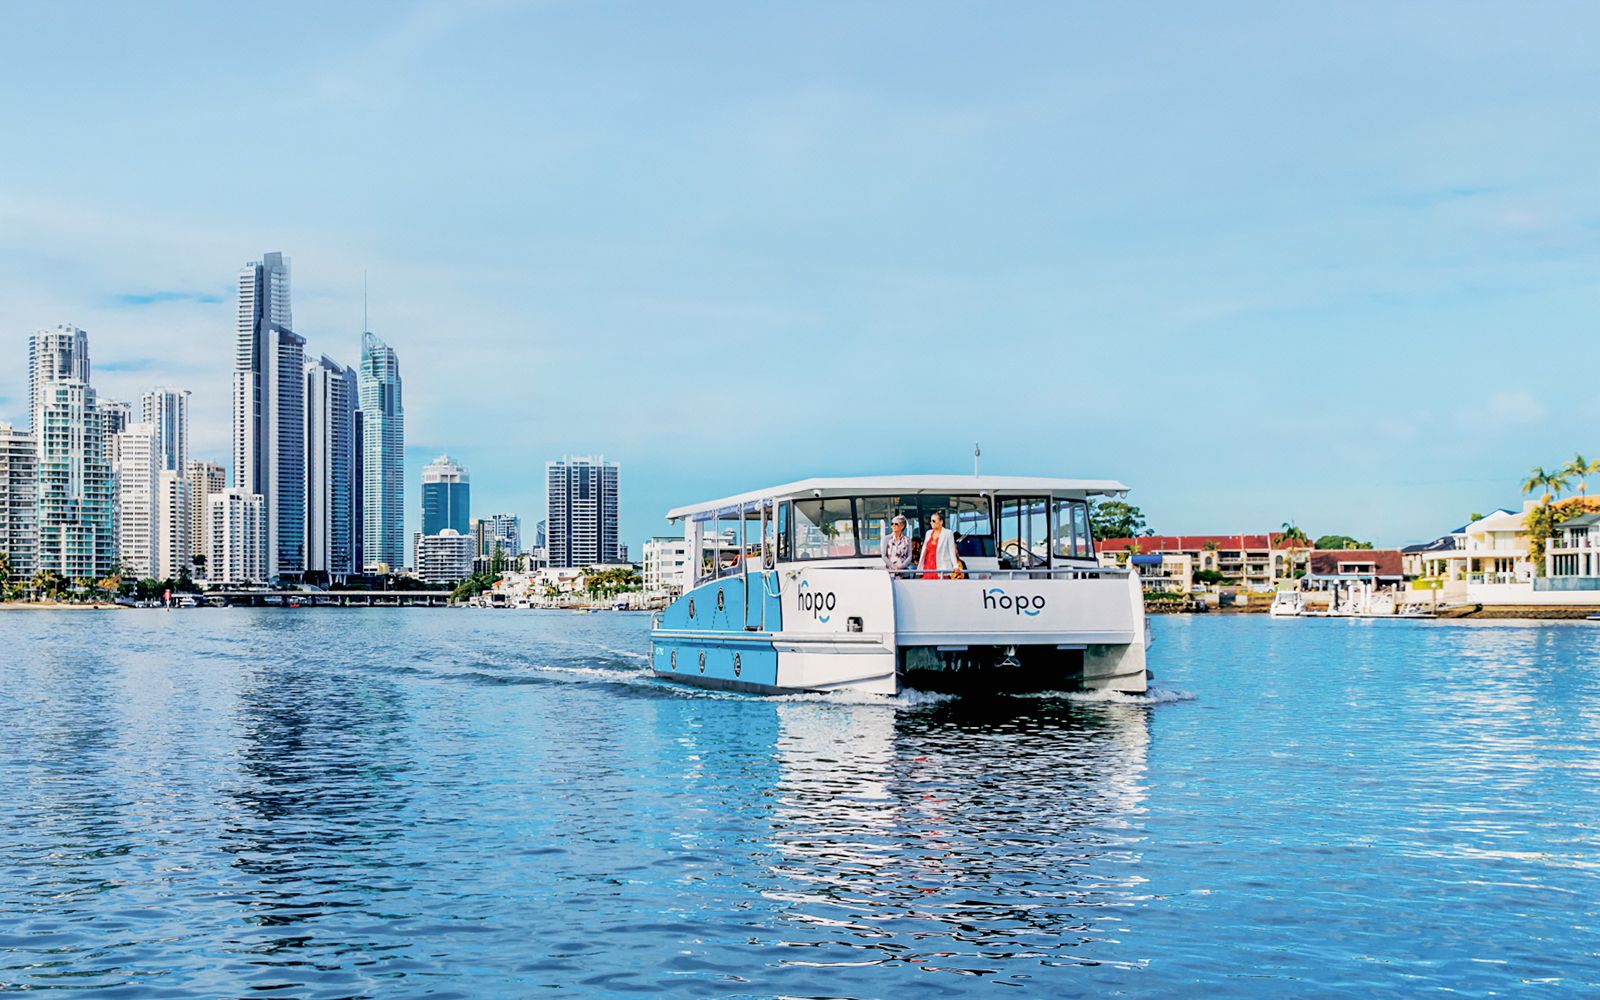 Imagen del tour: Hopo: 1-Day Hop-On Hop-Off Cruise Tour of Gold Coast with Free Bonus Day